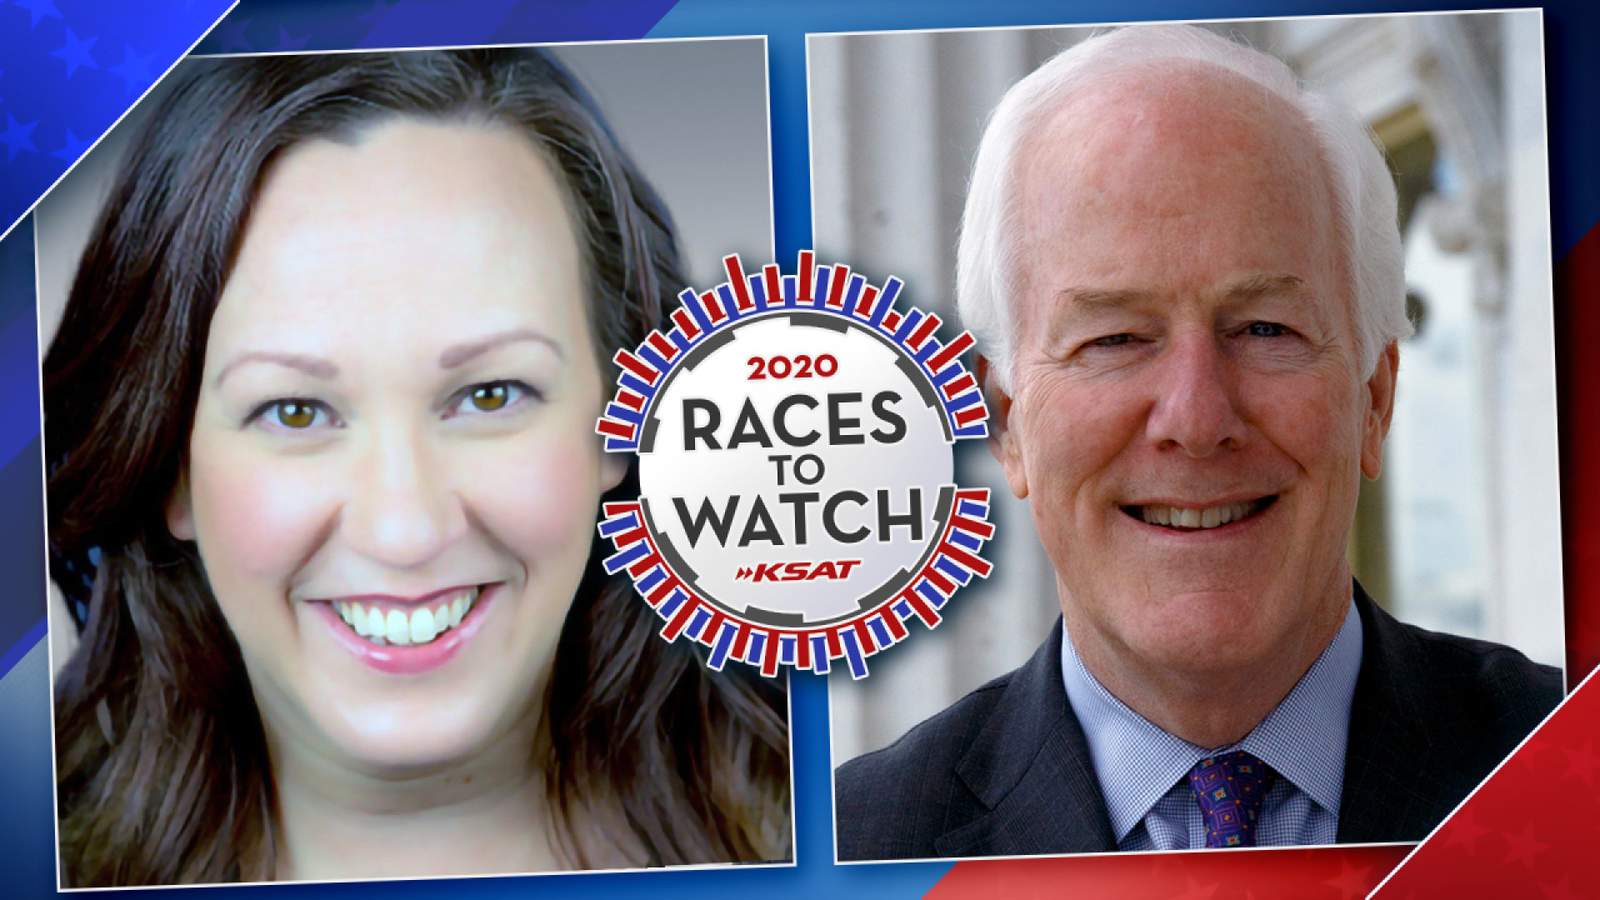 Election results 2020: ABC projects John Cornyn to win over Mary “MJ" Hegar for U.S. Senate, Texas